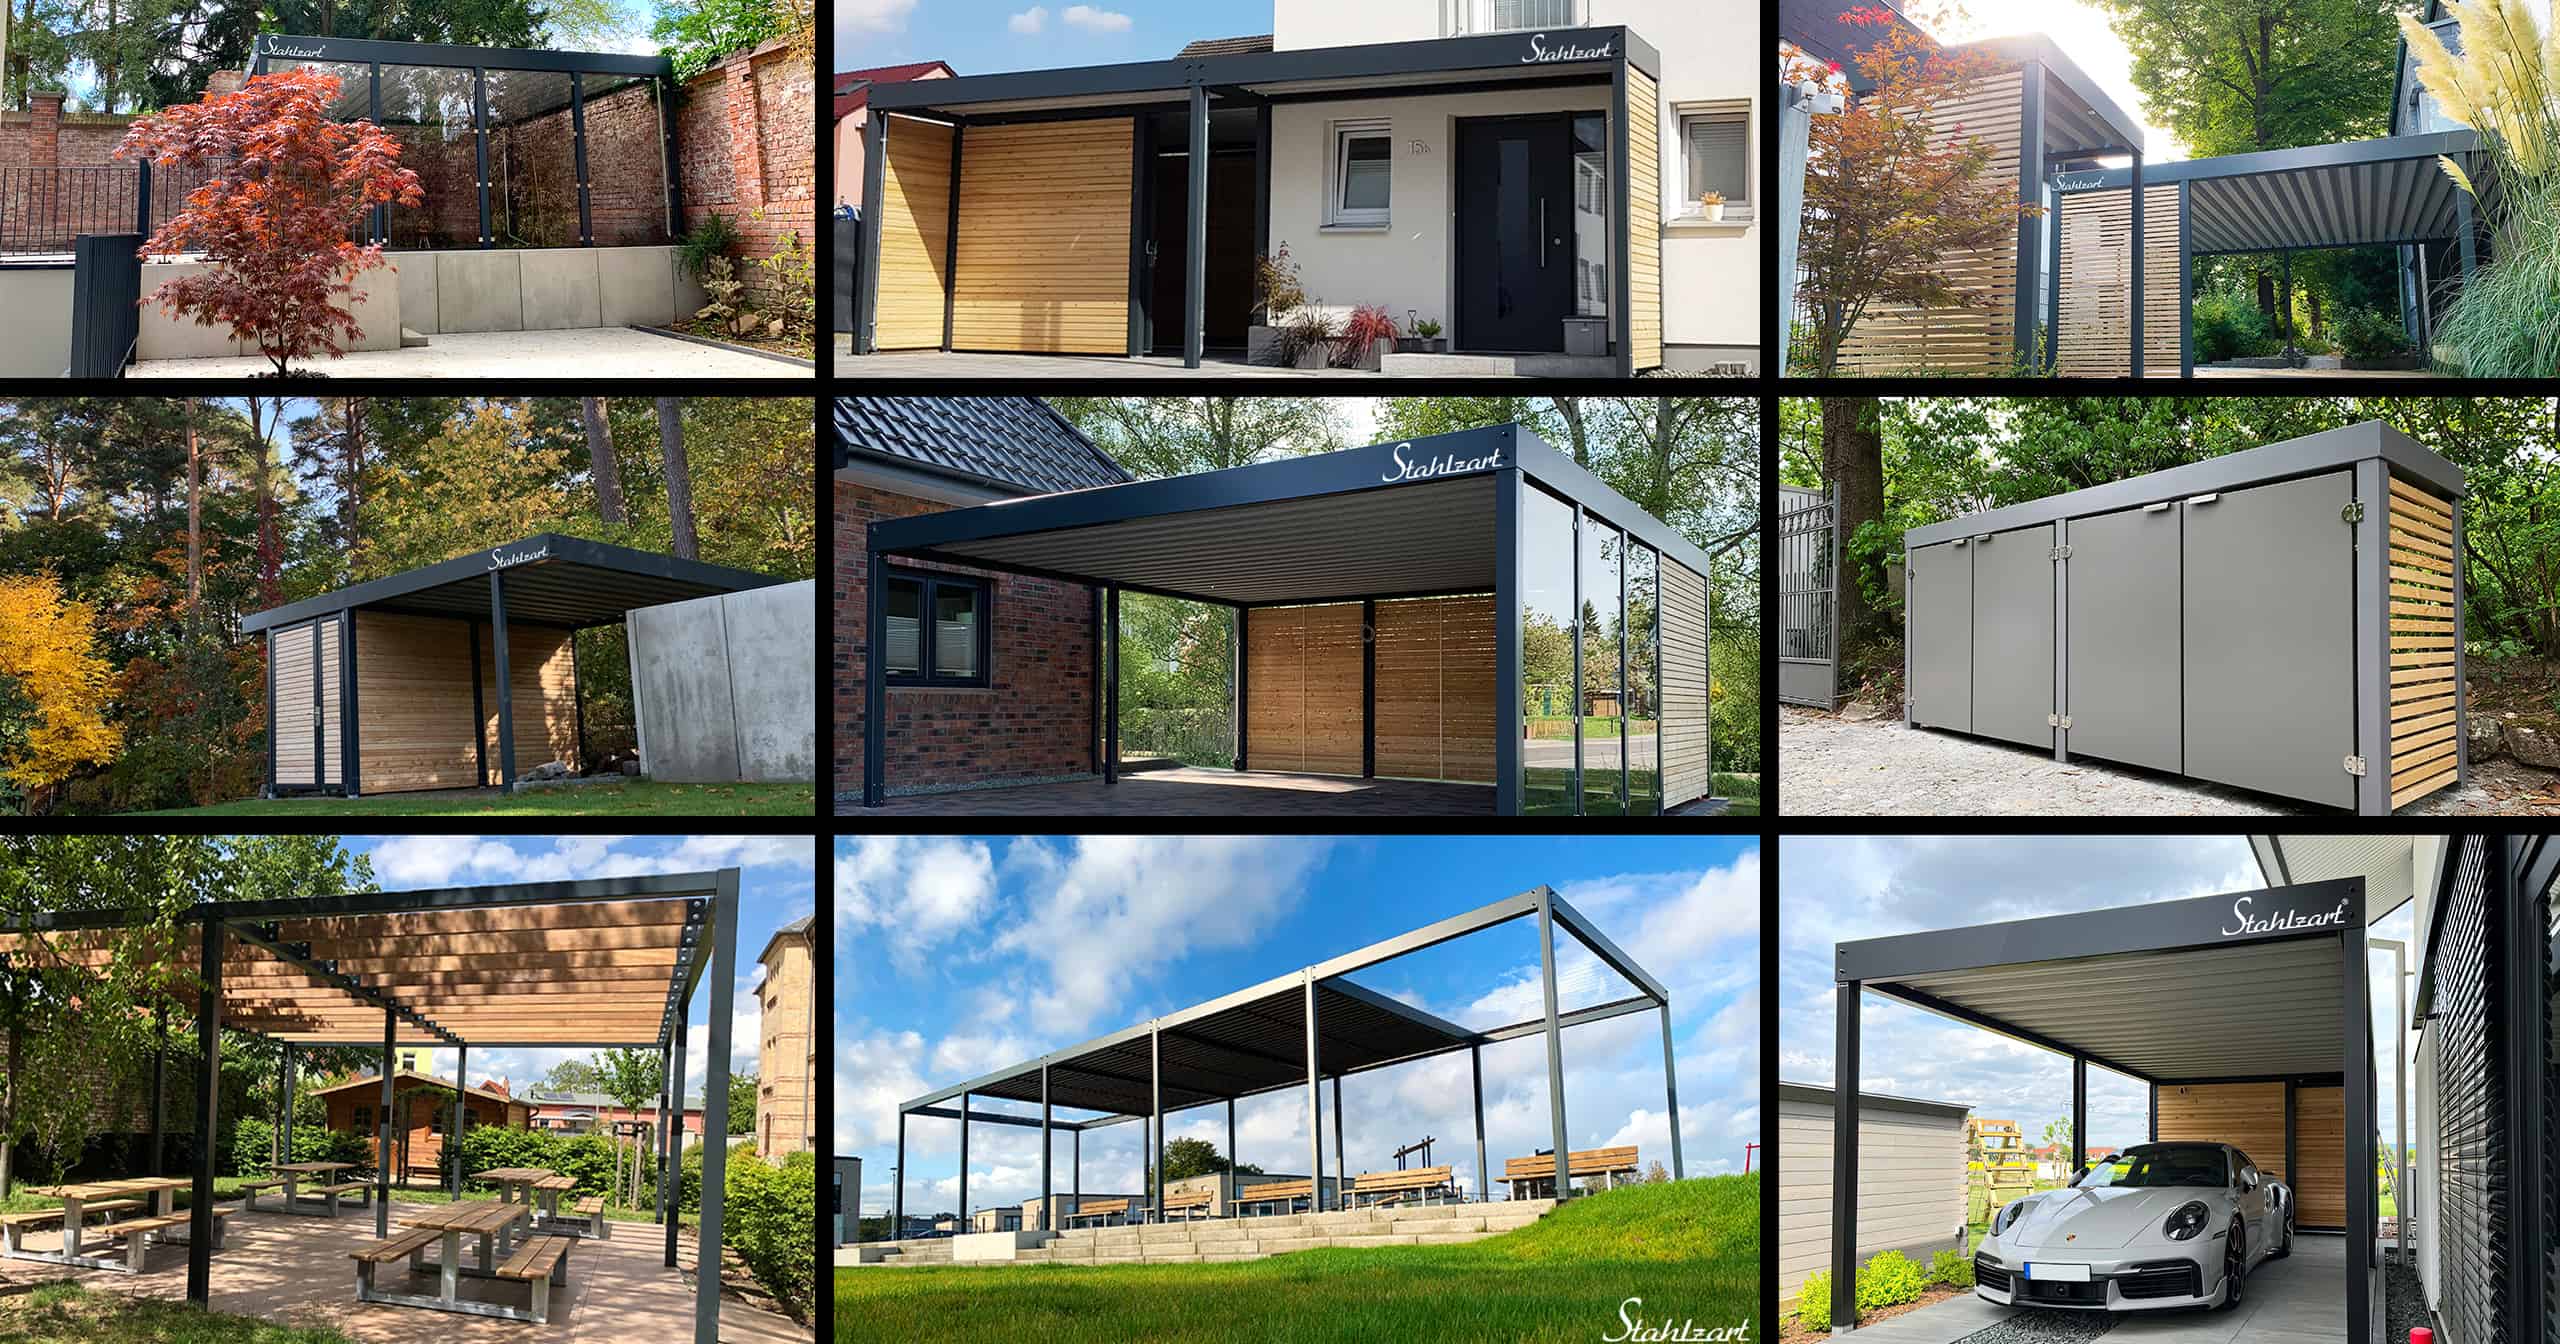 stahlzart-architecture-pergola-carport-single-double-row-carports-canopy-garage-for-bicycles-privacy-screen-fence-green-classroom-garden-house-shed-box-for-trashcans-modern-design-made-in-germany